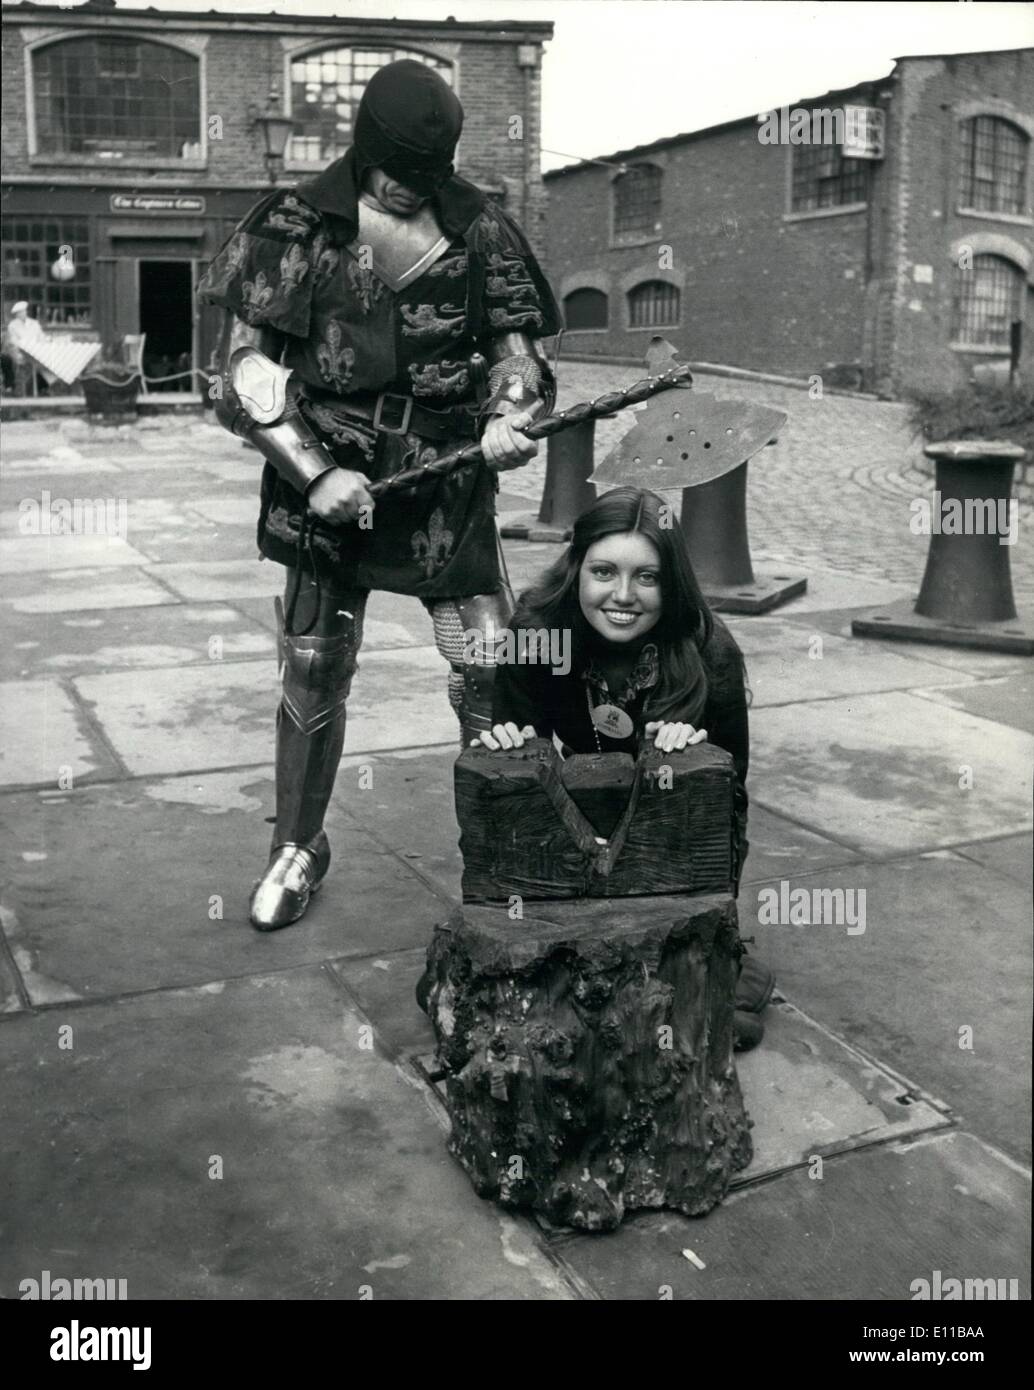 Nov. 11, 1976 - Miss World's Take A Trip On The Thames Contestants for the ''Miss World'' contest which takes place at the Royal Albert Hall, took a trip on the River Thames, aboard the :Father Thames'' pleasure boat. Photo Shows:- Miss Australia, 19 year old Karen Jo Pini with her head on the chopping block during a visit to the Tower of London - during a break in their river trip-the man holding the axe is Mr. Tim Condren who is a professional Knight and stunt man. Stock Photo